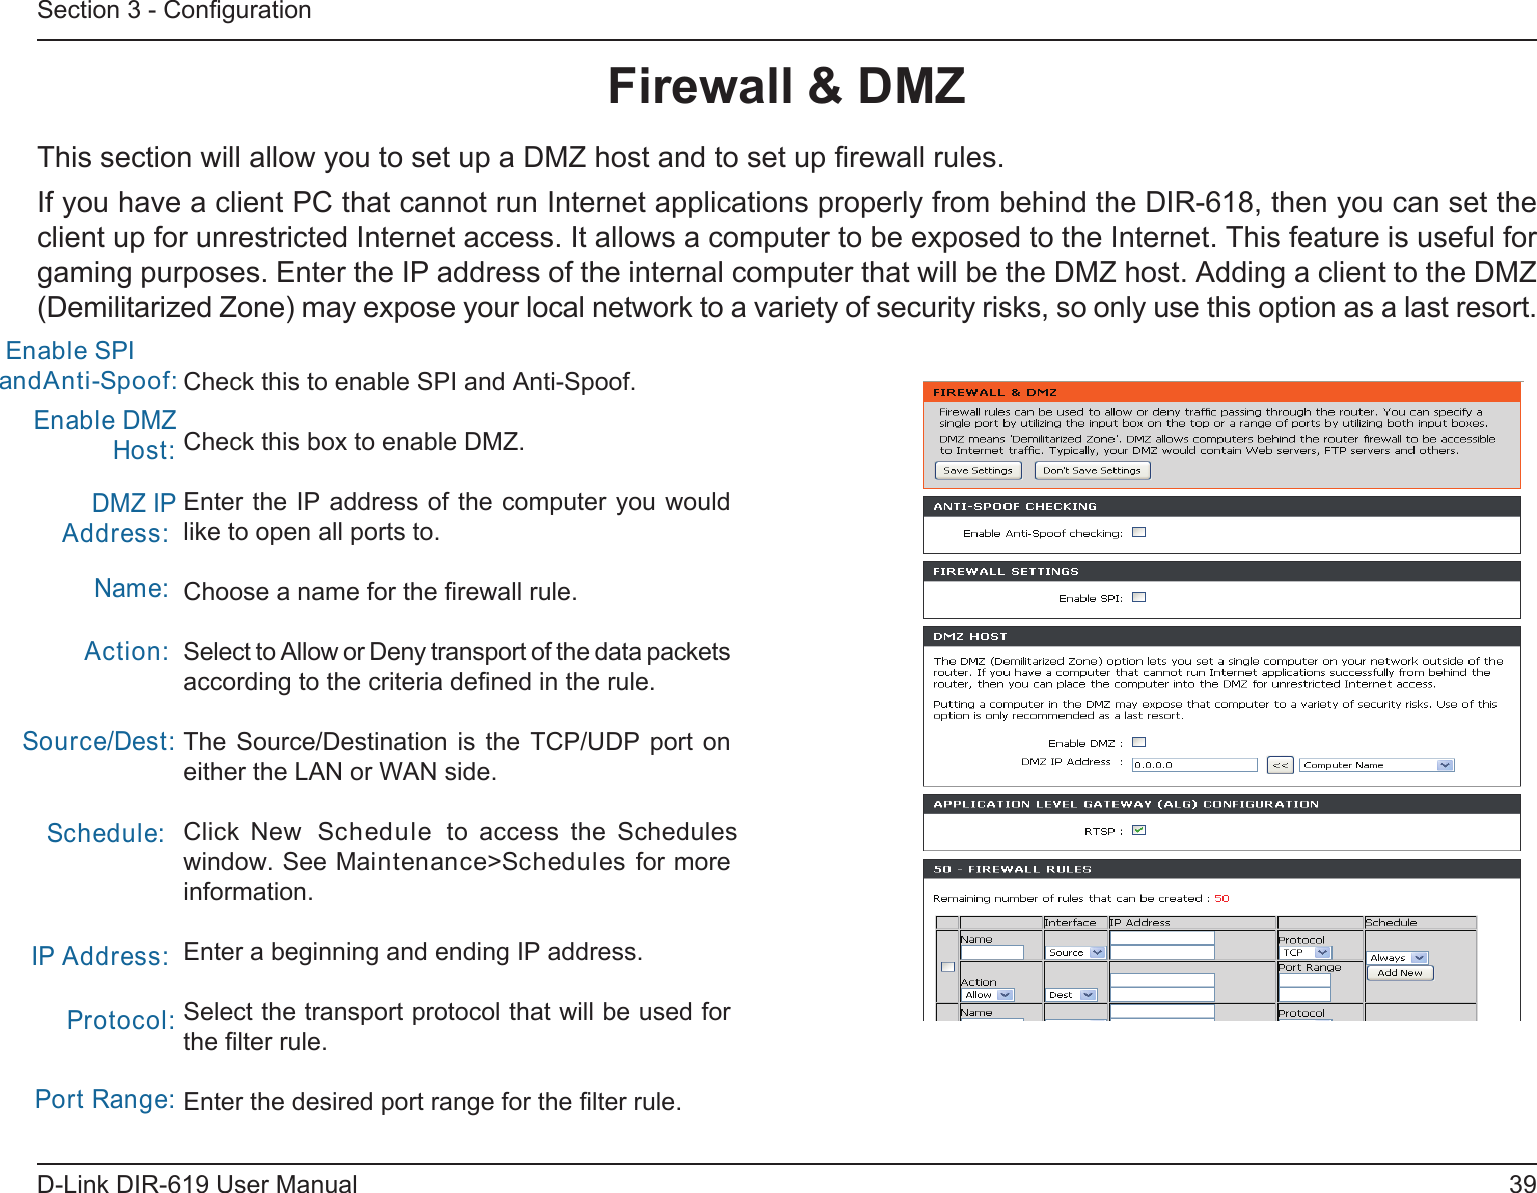 39D-Link DIR-619 User ManualSection 3 - ConﬁgurationFirewall &amp; DMZThis section will allow you to set up a DMZ host and to set up ﬁrewall rules.If you have a client PC that cannot run Internet applications properly from behind the DIR-618, then you can set the client up for unrestricted Internet access. It allows a computer to be exposed to the Internet. This feature is useful for gaming purposes. Enter the IP address of the internal computer that will be the DMZ host. Adding a client to the DMZ(Demilitarized Zone) may expose your local network to a variety of security risks, so only use this option as a last resort.Check this to enable SPI and Anti-Spoof.Check this box to enable DMZ.Enter the IP address of the computer you would like to open all ports to.Choose a name for the ﬁrewall rule.Select to Allow or Deny transport of the data packets according to the criteria deﬁned in the rule. The  Source/Destination  is  the TCP/UDP port on either the LAN or WAN side.Click  New  Schedule  to  access  the  Schedules window. See Maintenance&gt;Schedules for more information.Enter a beginning and ending IP address.Select the transport protocol that will be used for the ﬁlter rule.Enter the desired port range for the ﬁlter rule.Enable DMZ Host:DMZ IP Address:Name:Action:Source/Dest:Schedule:IP Address:Protocol:Port Range: Enable SPI andAnti-Spoof:    